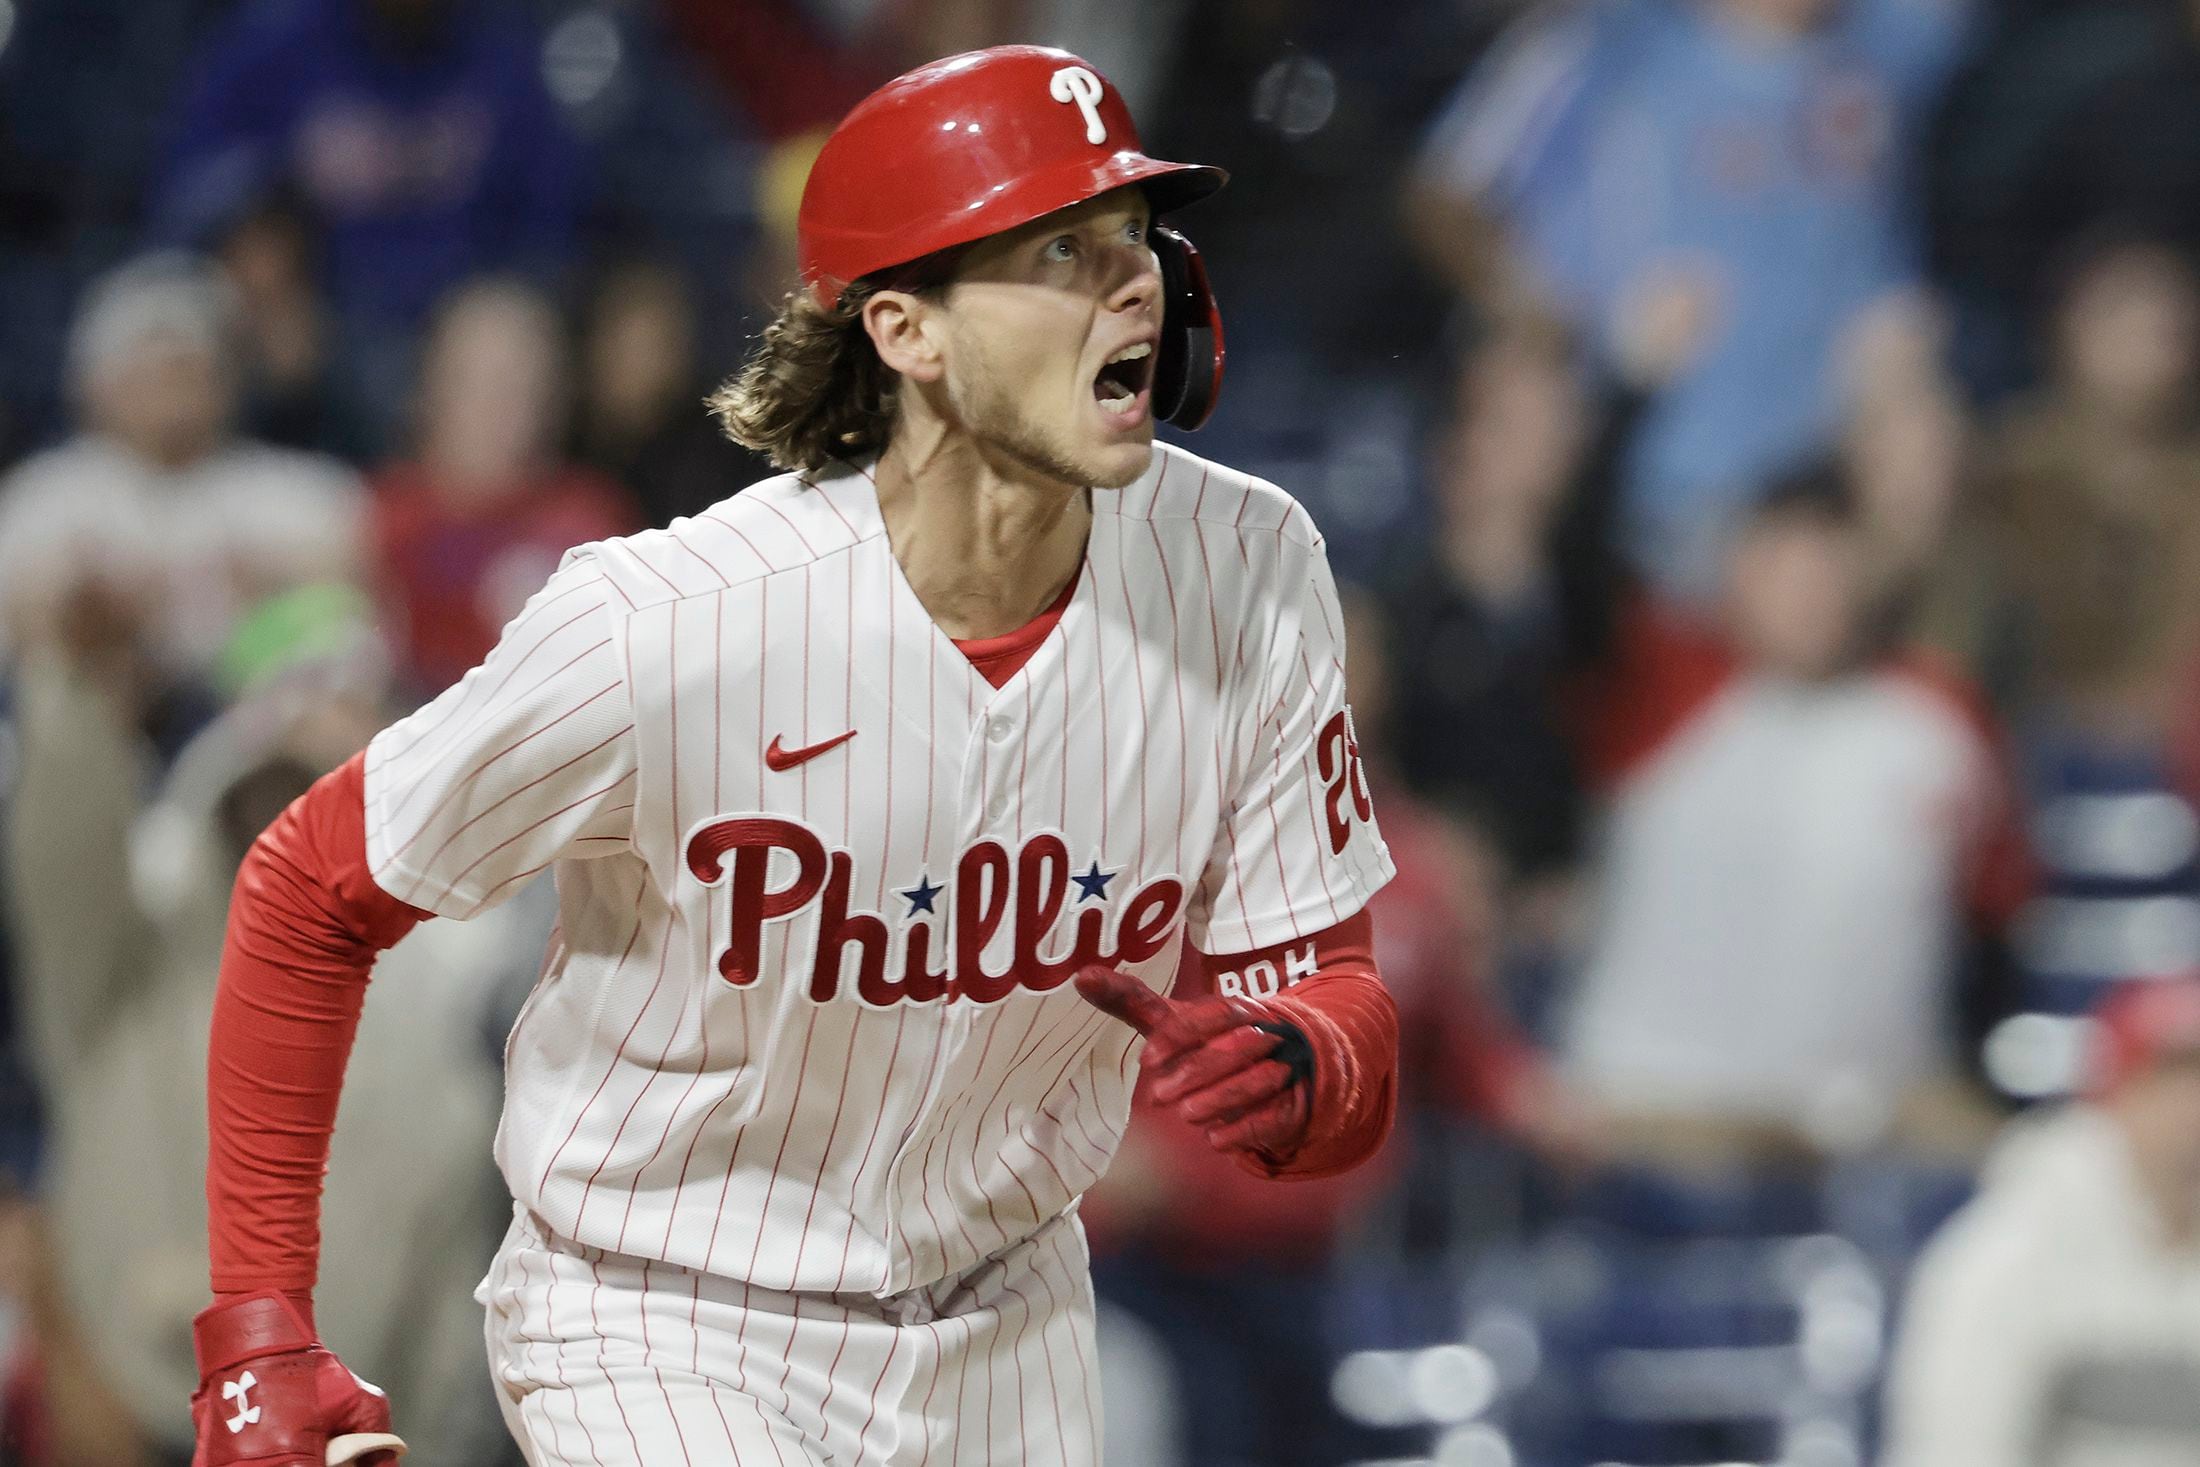 Bryson Stott unaware of grand slam heroics, admits getting 'blacked out' in  Phillies' Wild Card victory - I didn't know I did that